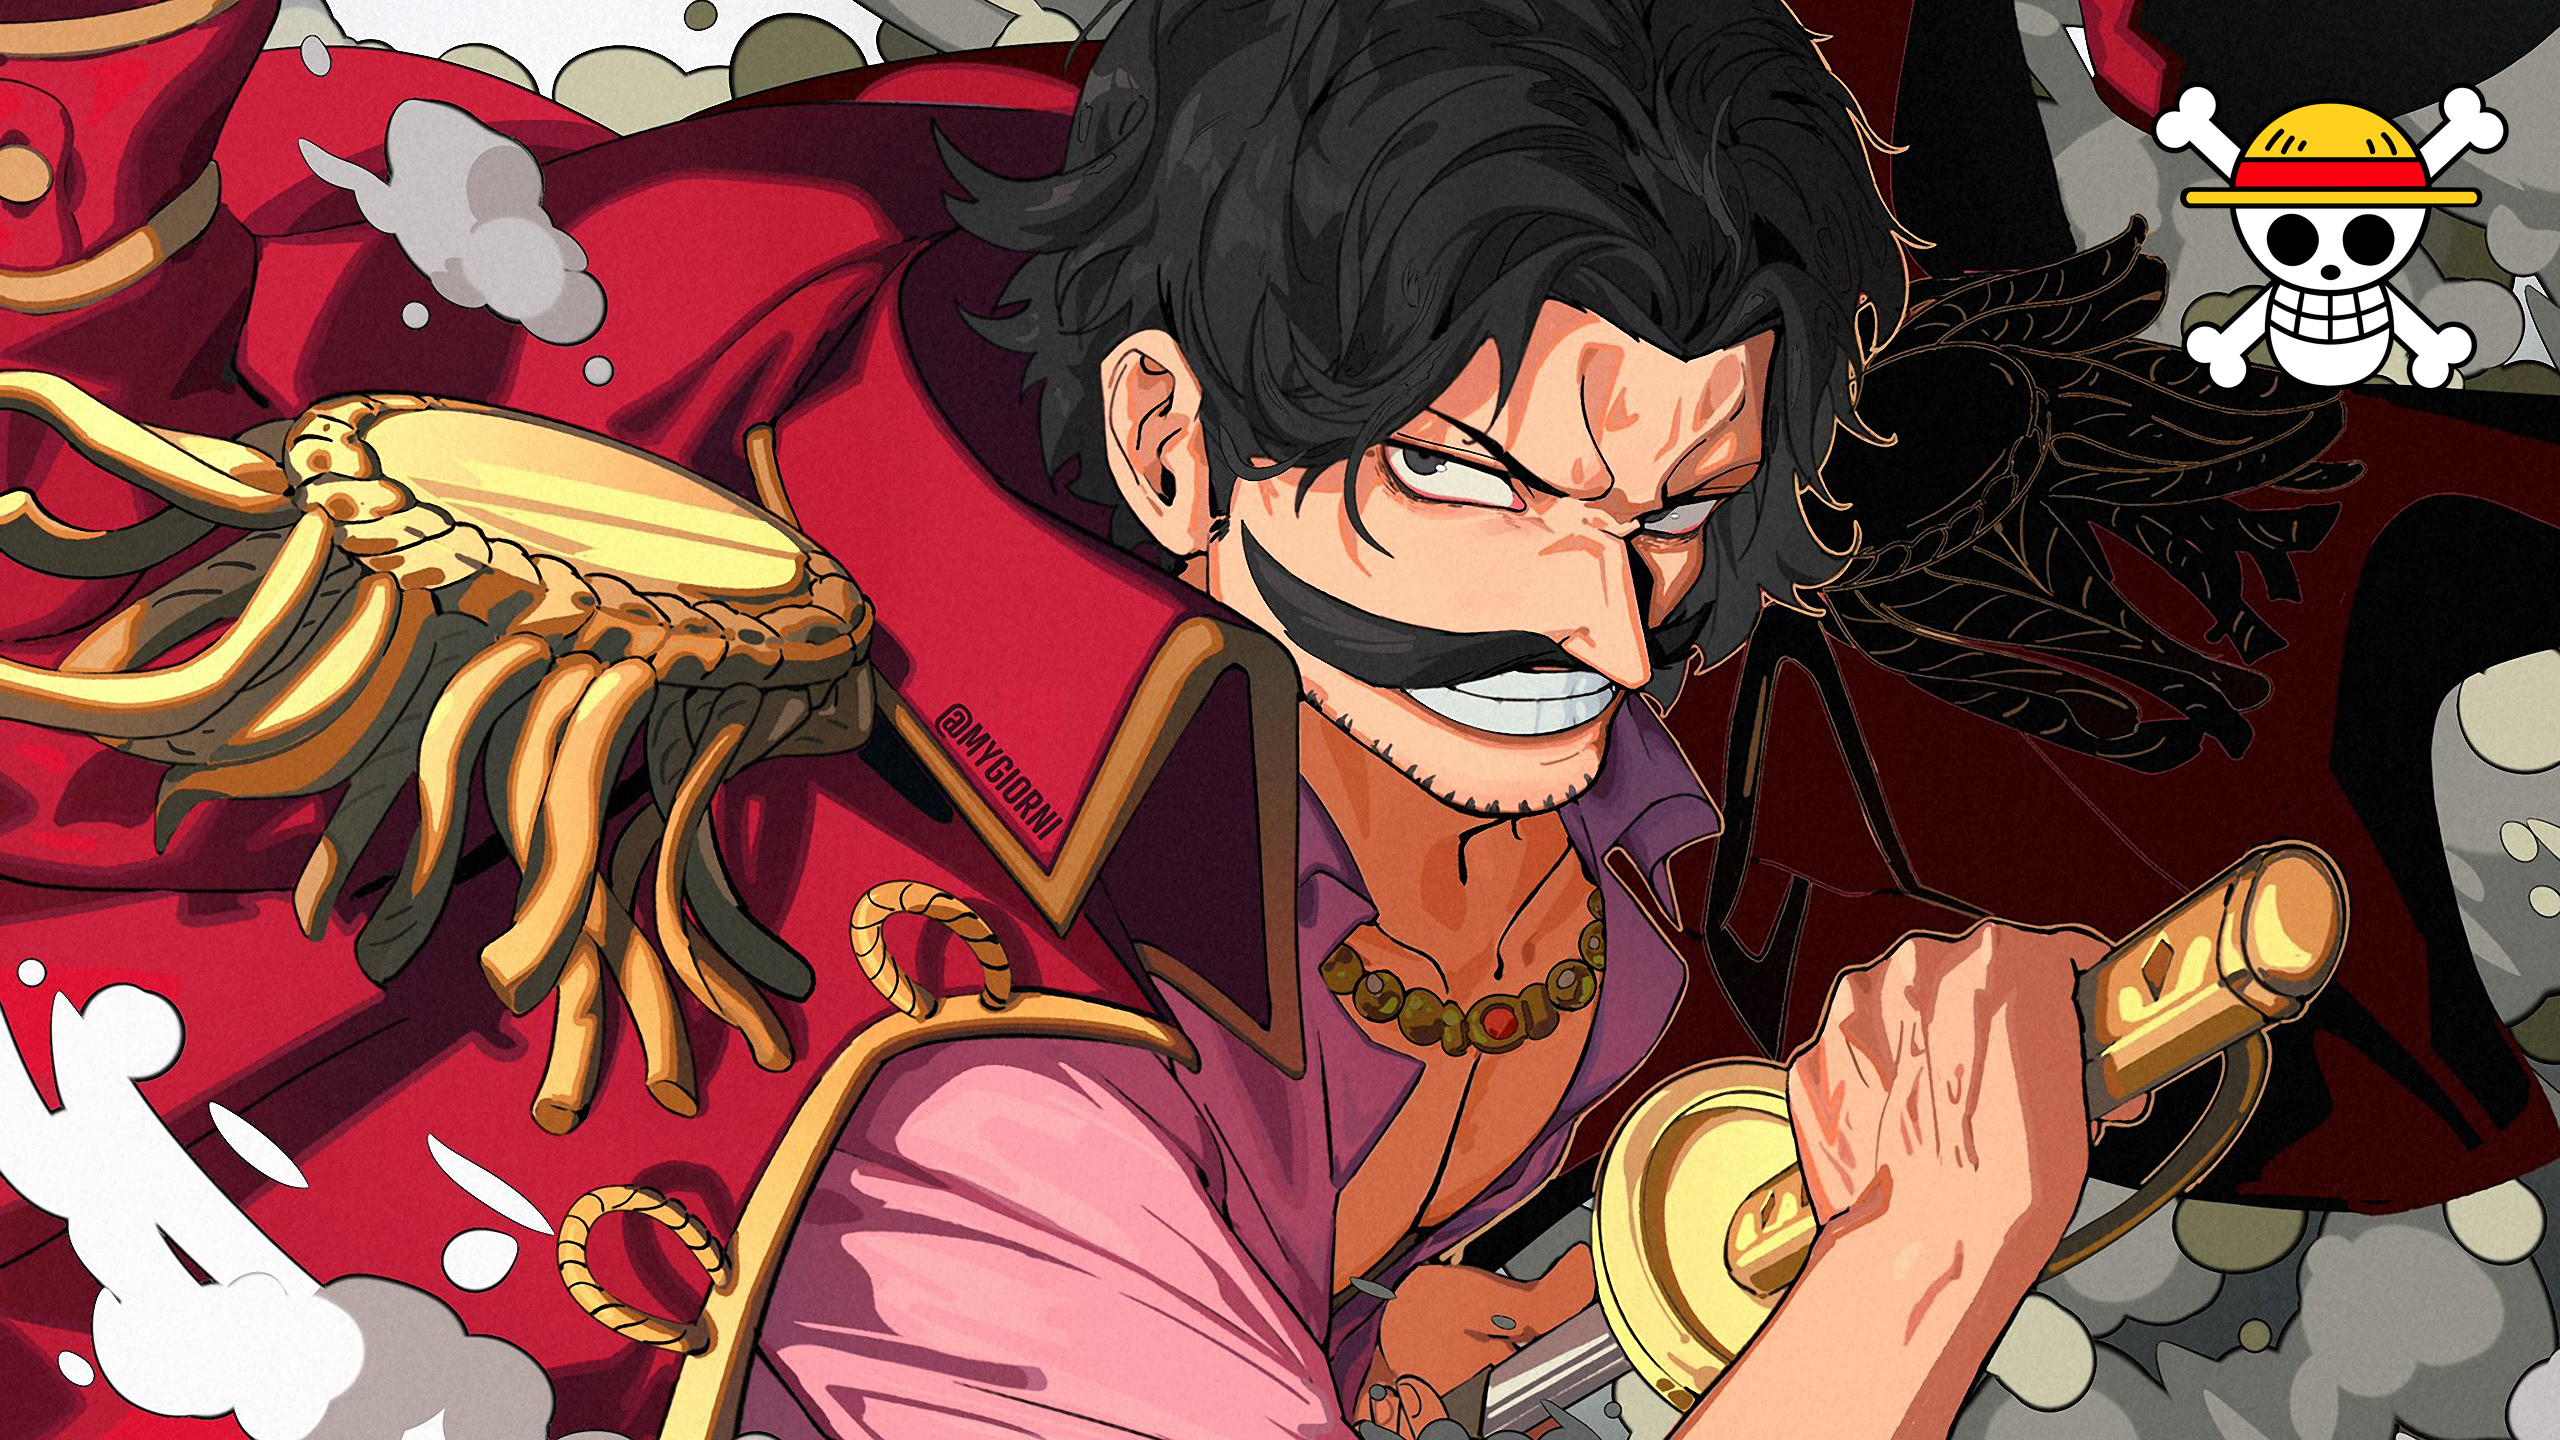 Anime 2560x1440 One Piece Gold D.Roger anime men moustache sword smiling watermarked